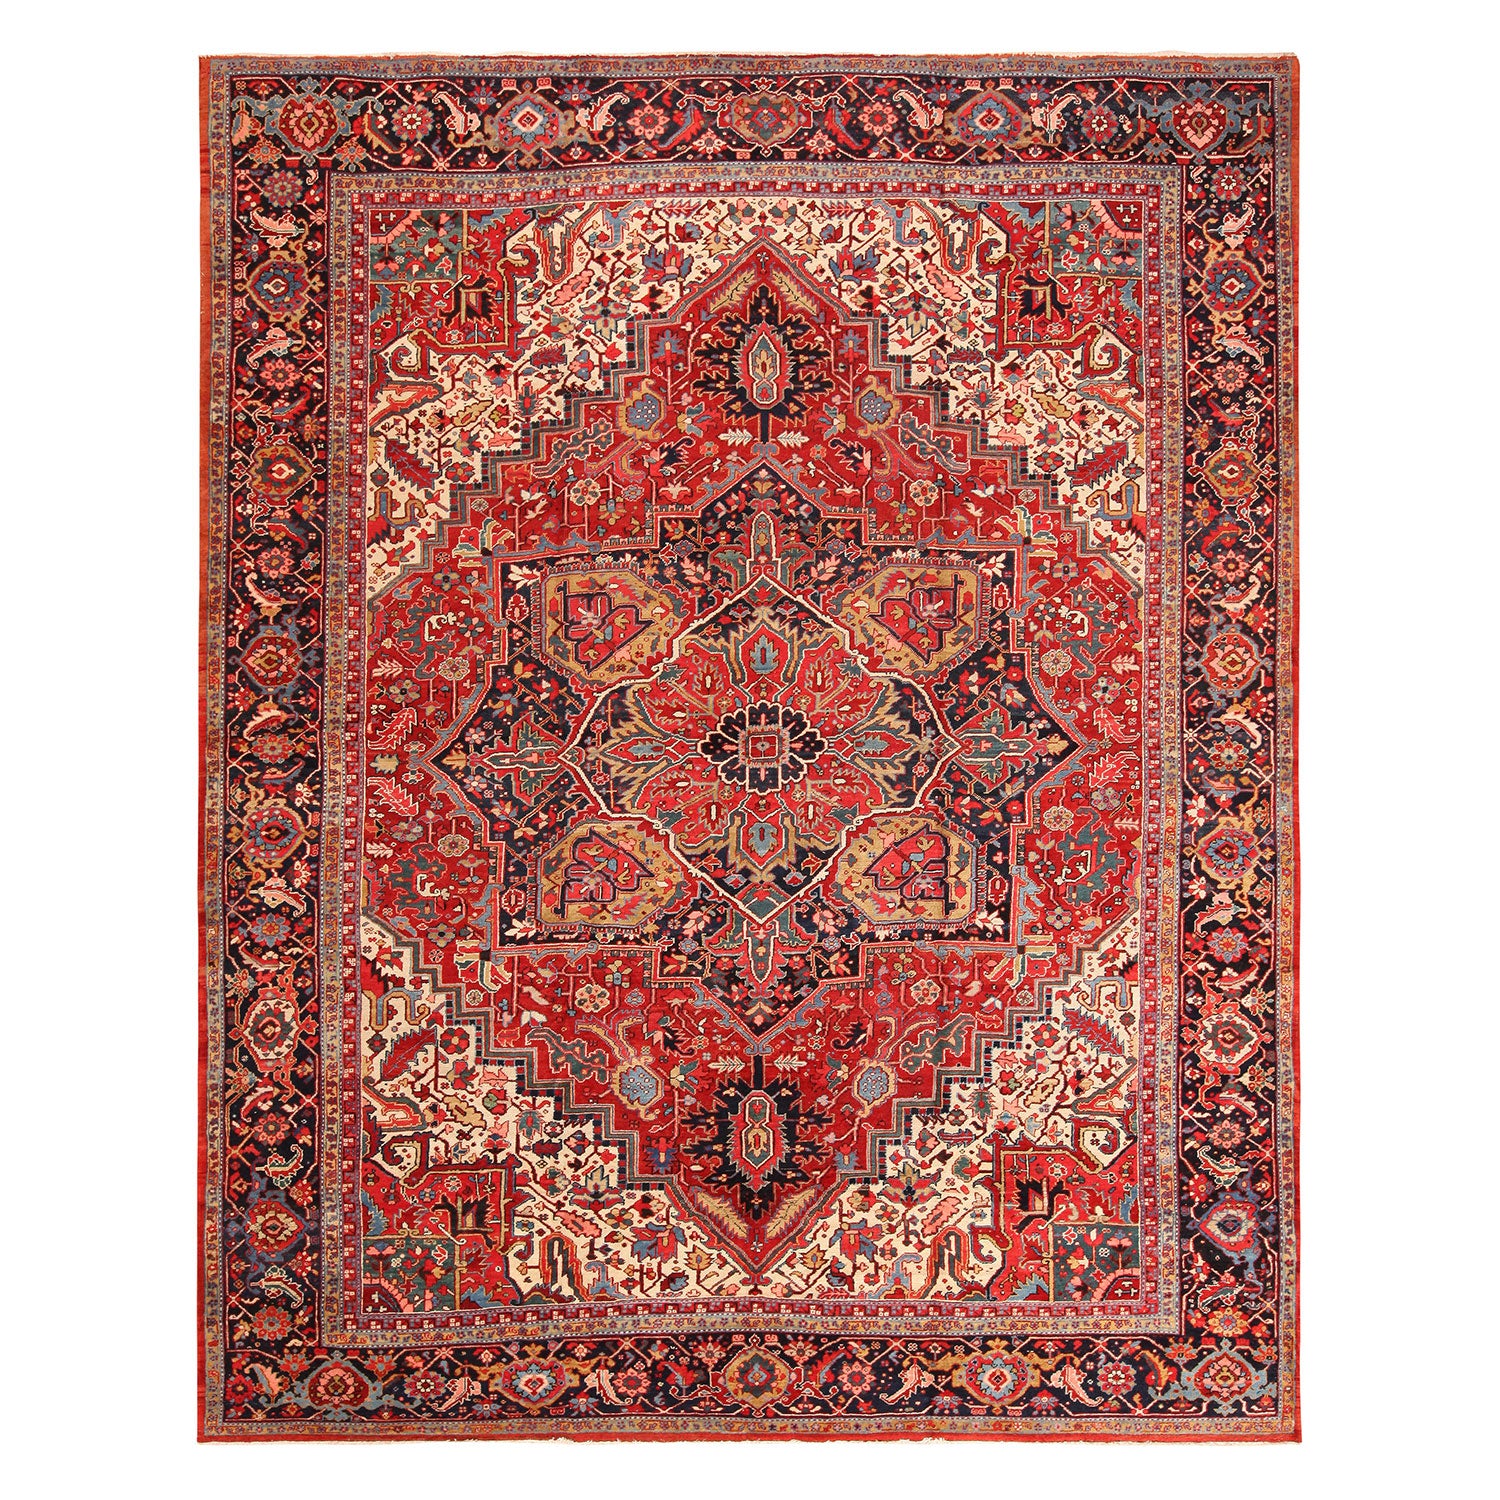 Exquisite Oriental carpet features intricate design with rich colors and patterns.